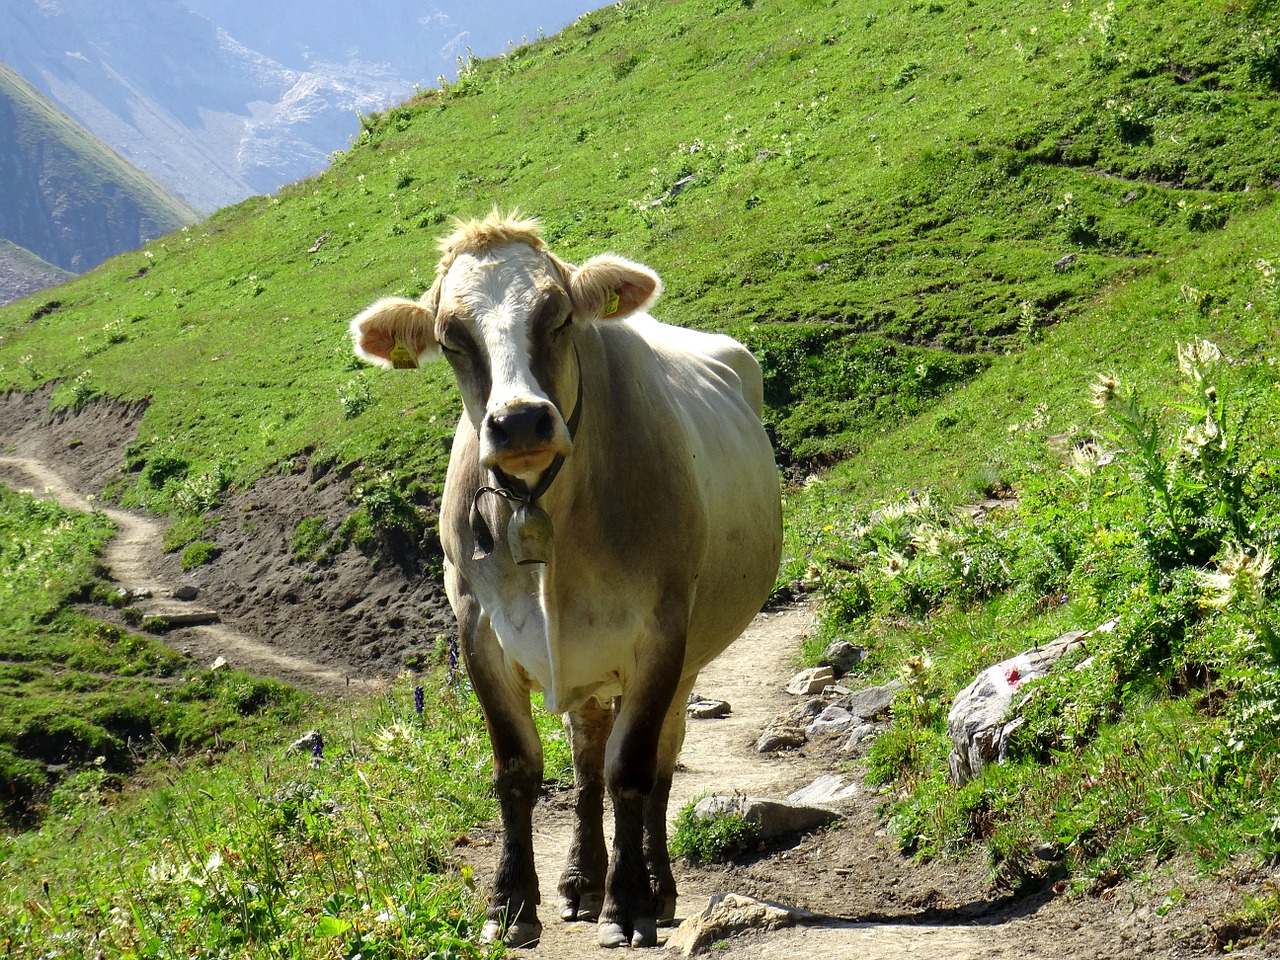 cow animal cattle free photo